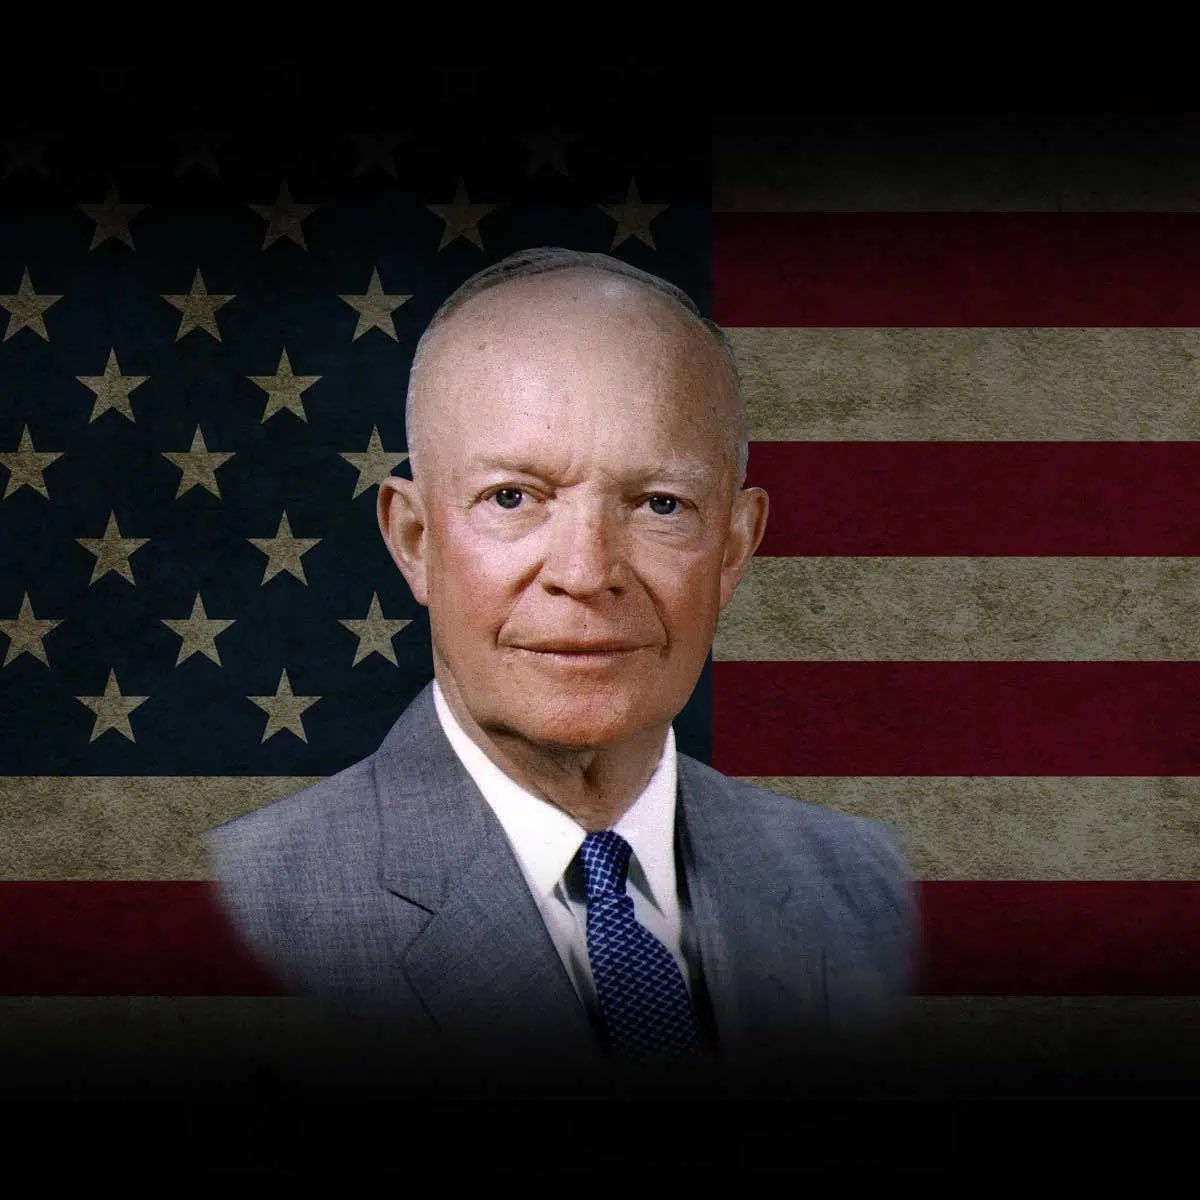 '#Inflation is not a Robin Hood, taking from the rich to give to the poor. Rather, it deals most cruelly with those who can least protect themselves.' — President Dwight Eisenhower